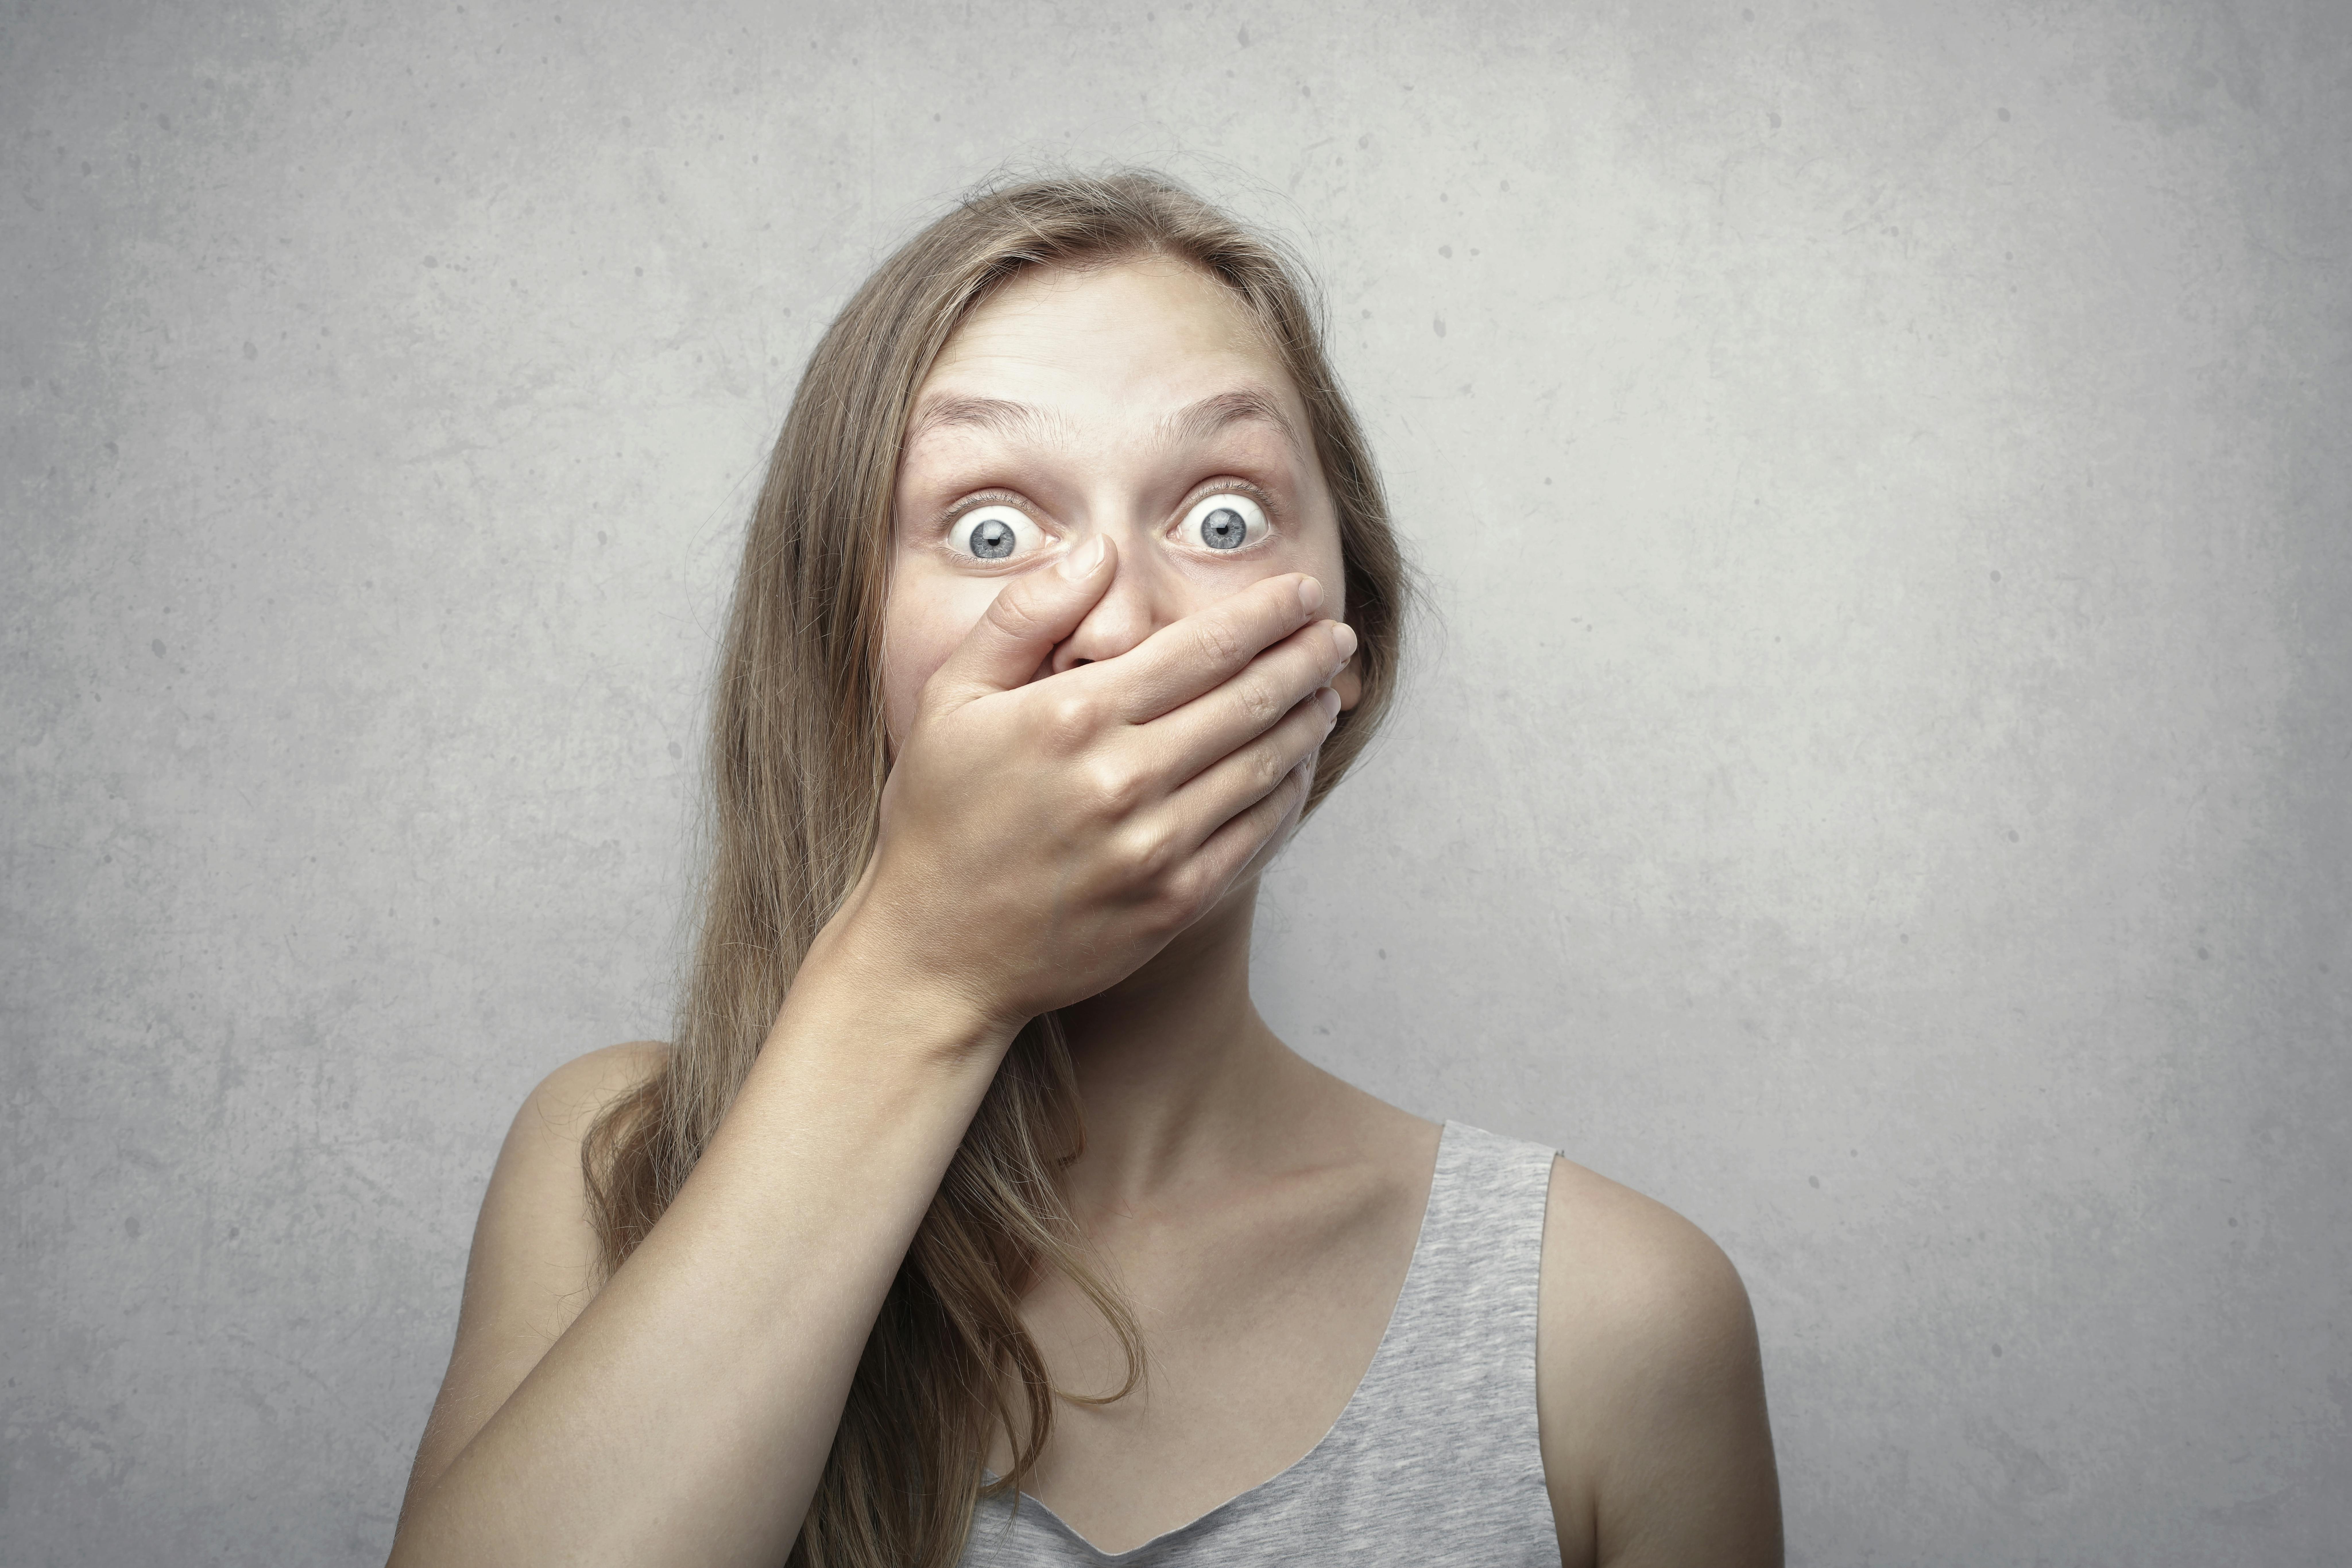 A surprised woman with her eyes wide and hand over her mouth | Source: Pexels